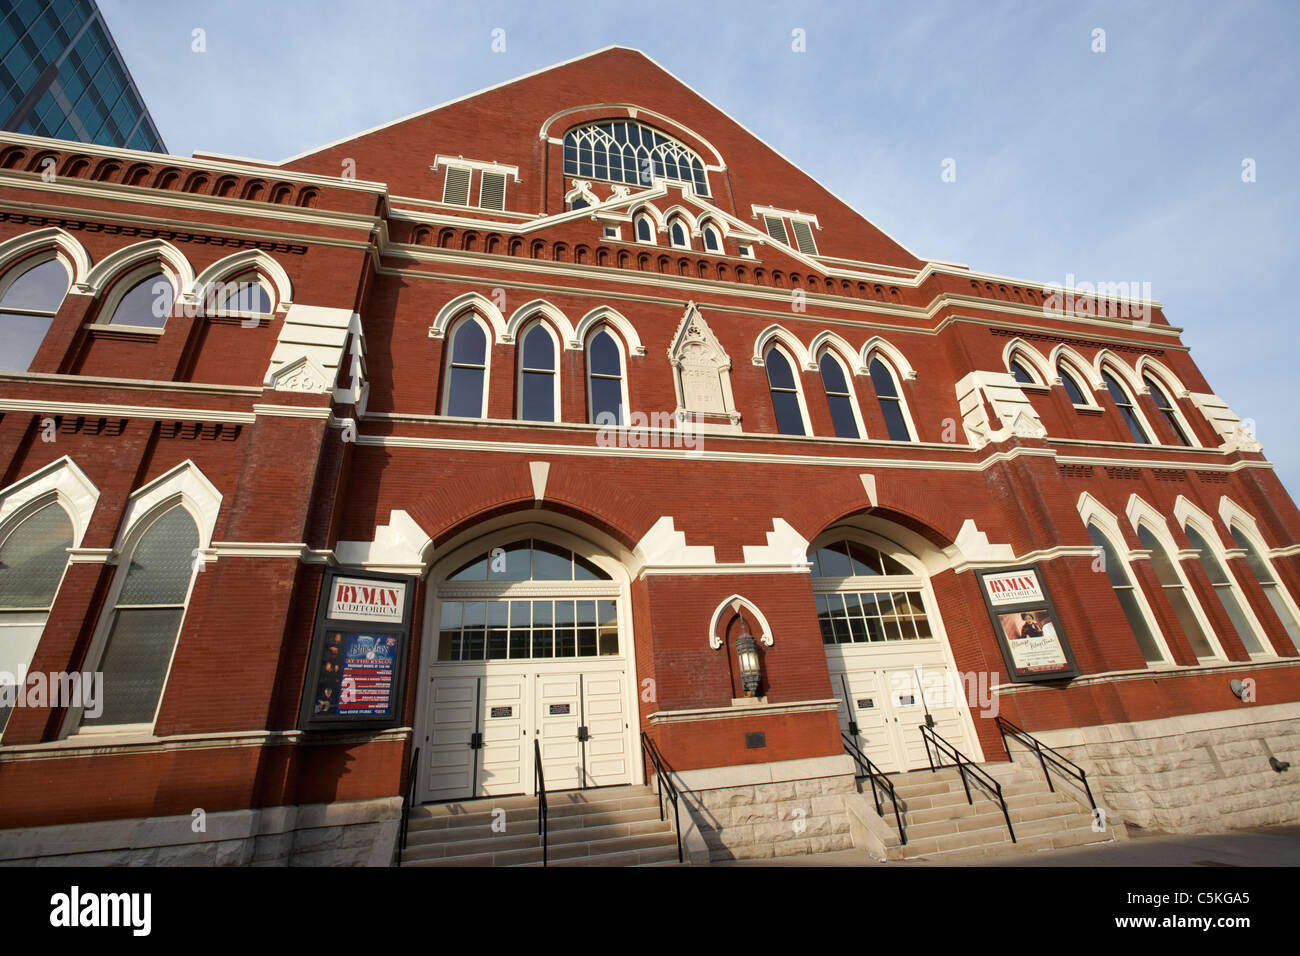 The Ryman Auditorium former home of the Grand Ole Opry and gospel union tabernacle Nashville Tennessee USA Stock Photo